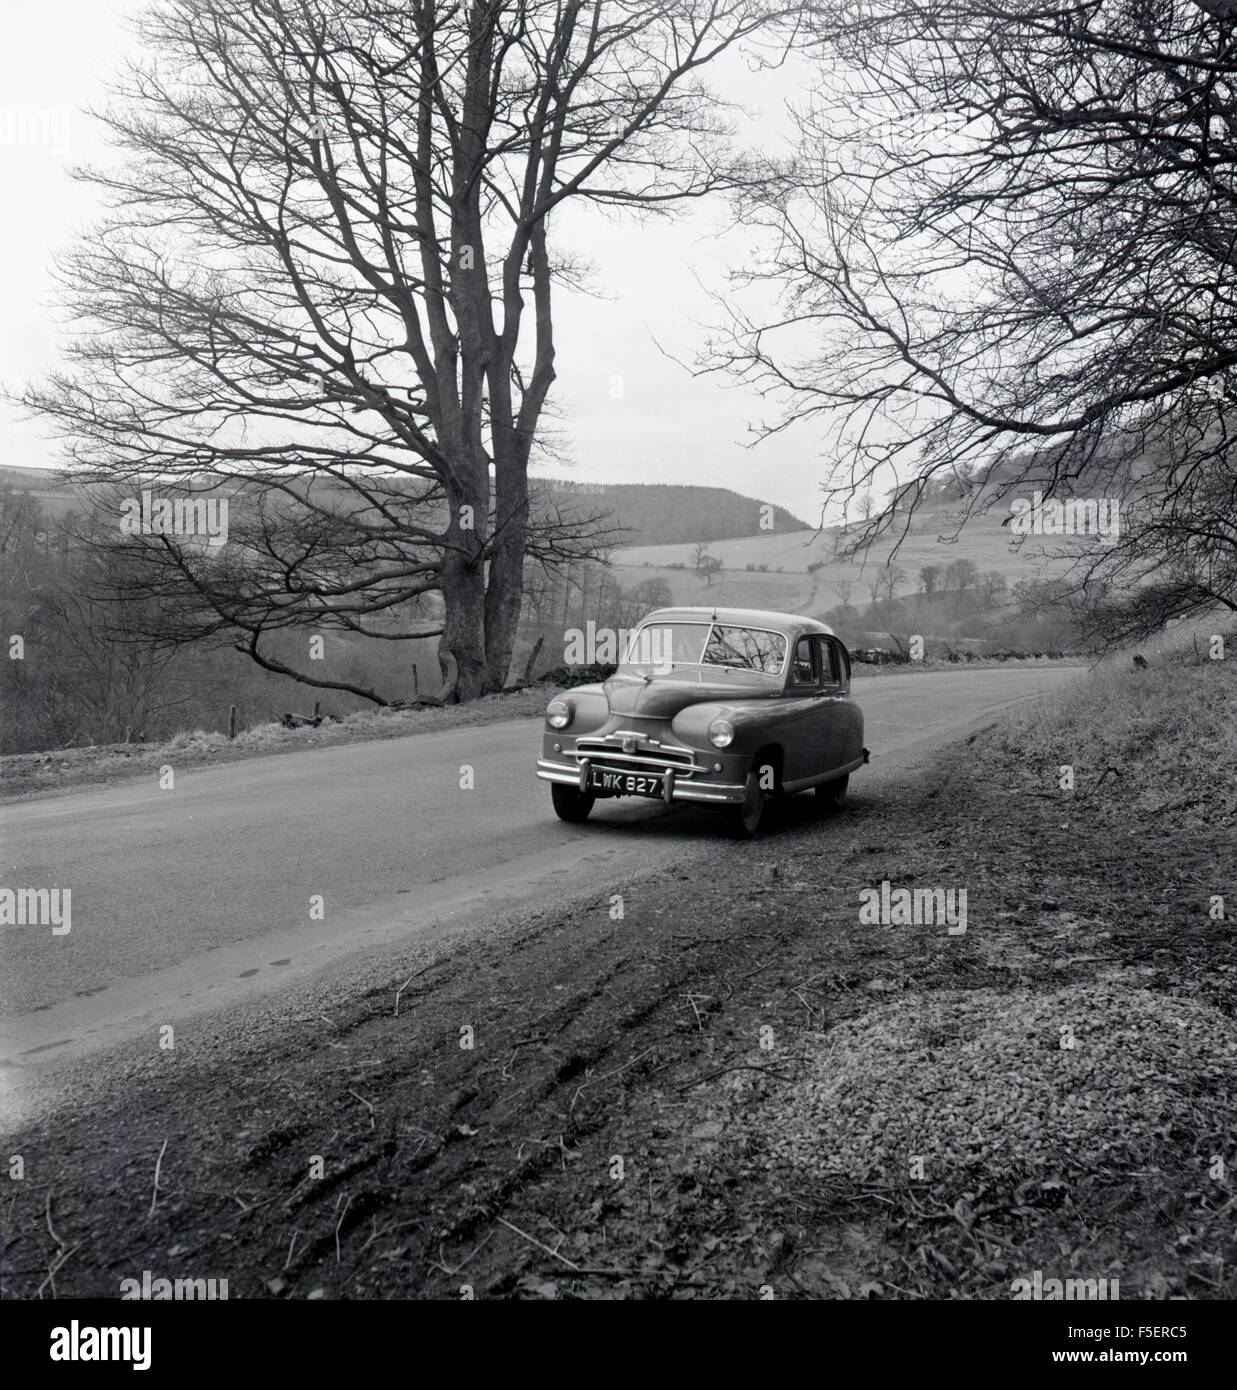 1950s historical picture of a Standard Vanguard car parked on the side of a country road. Stock Photo